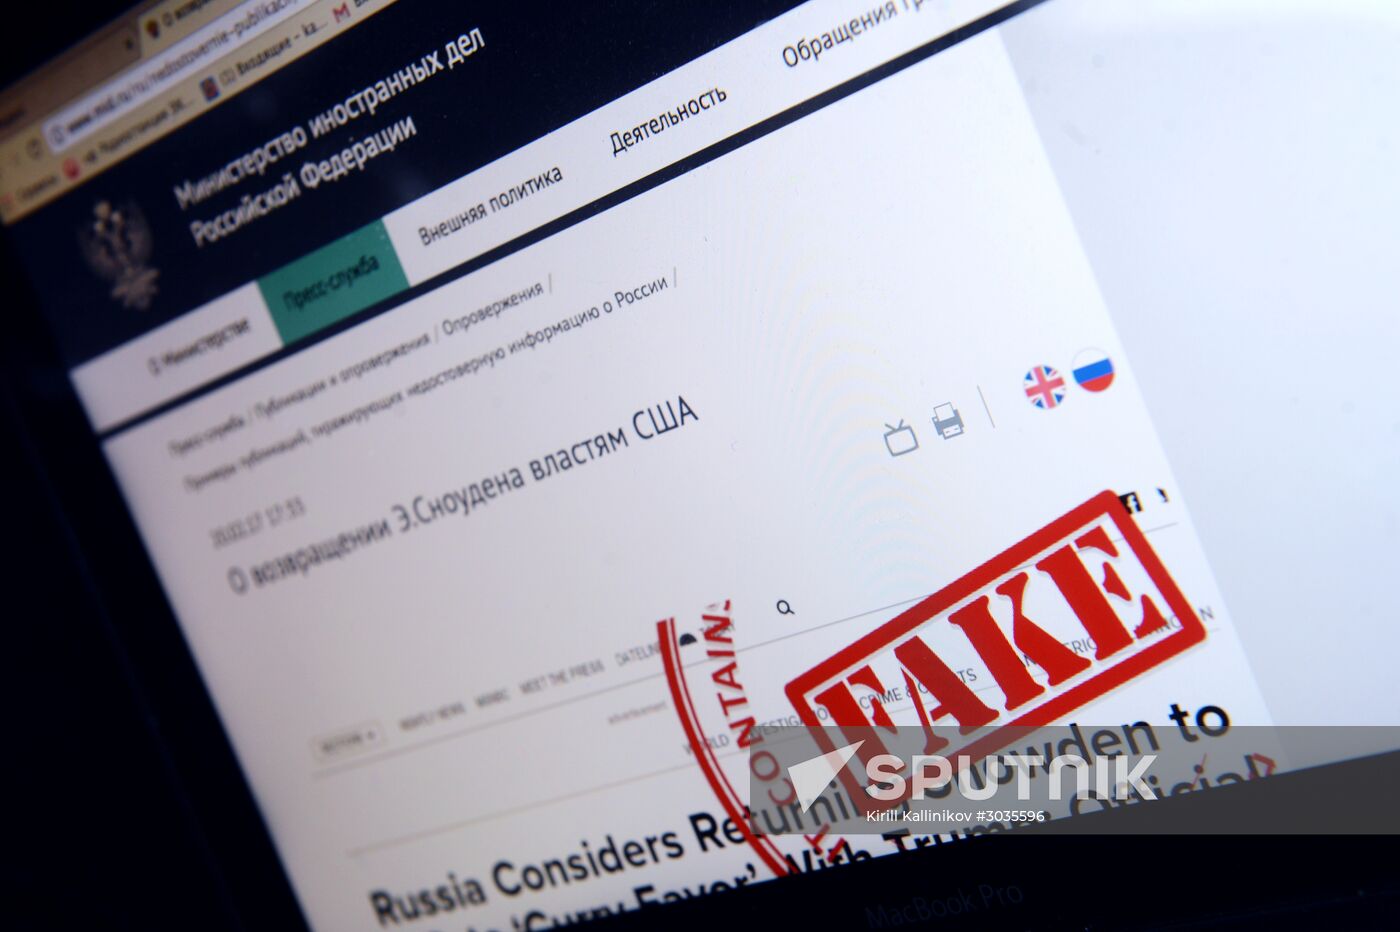 Presentation of Russian Foreign Affairs Ministry's "antifake" project